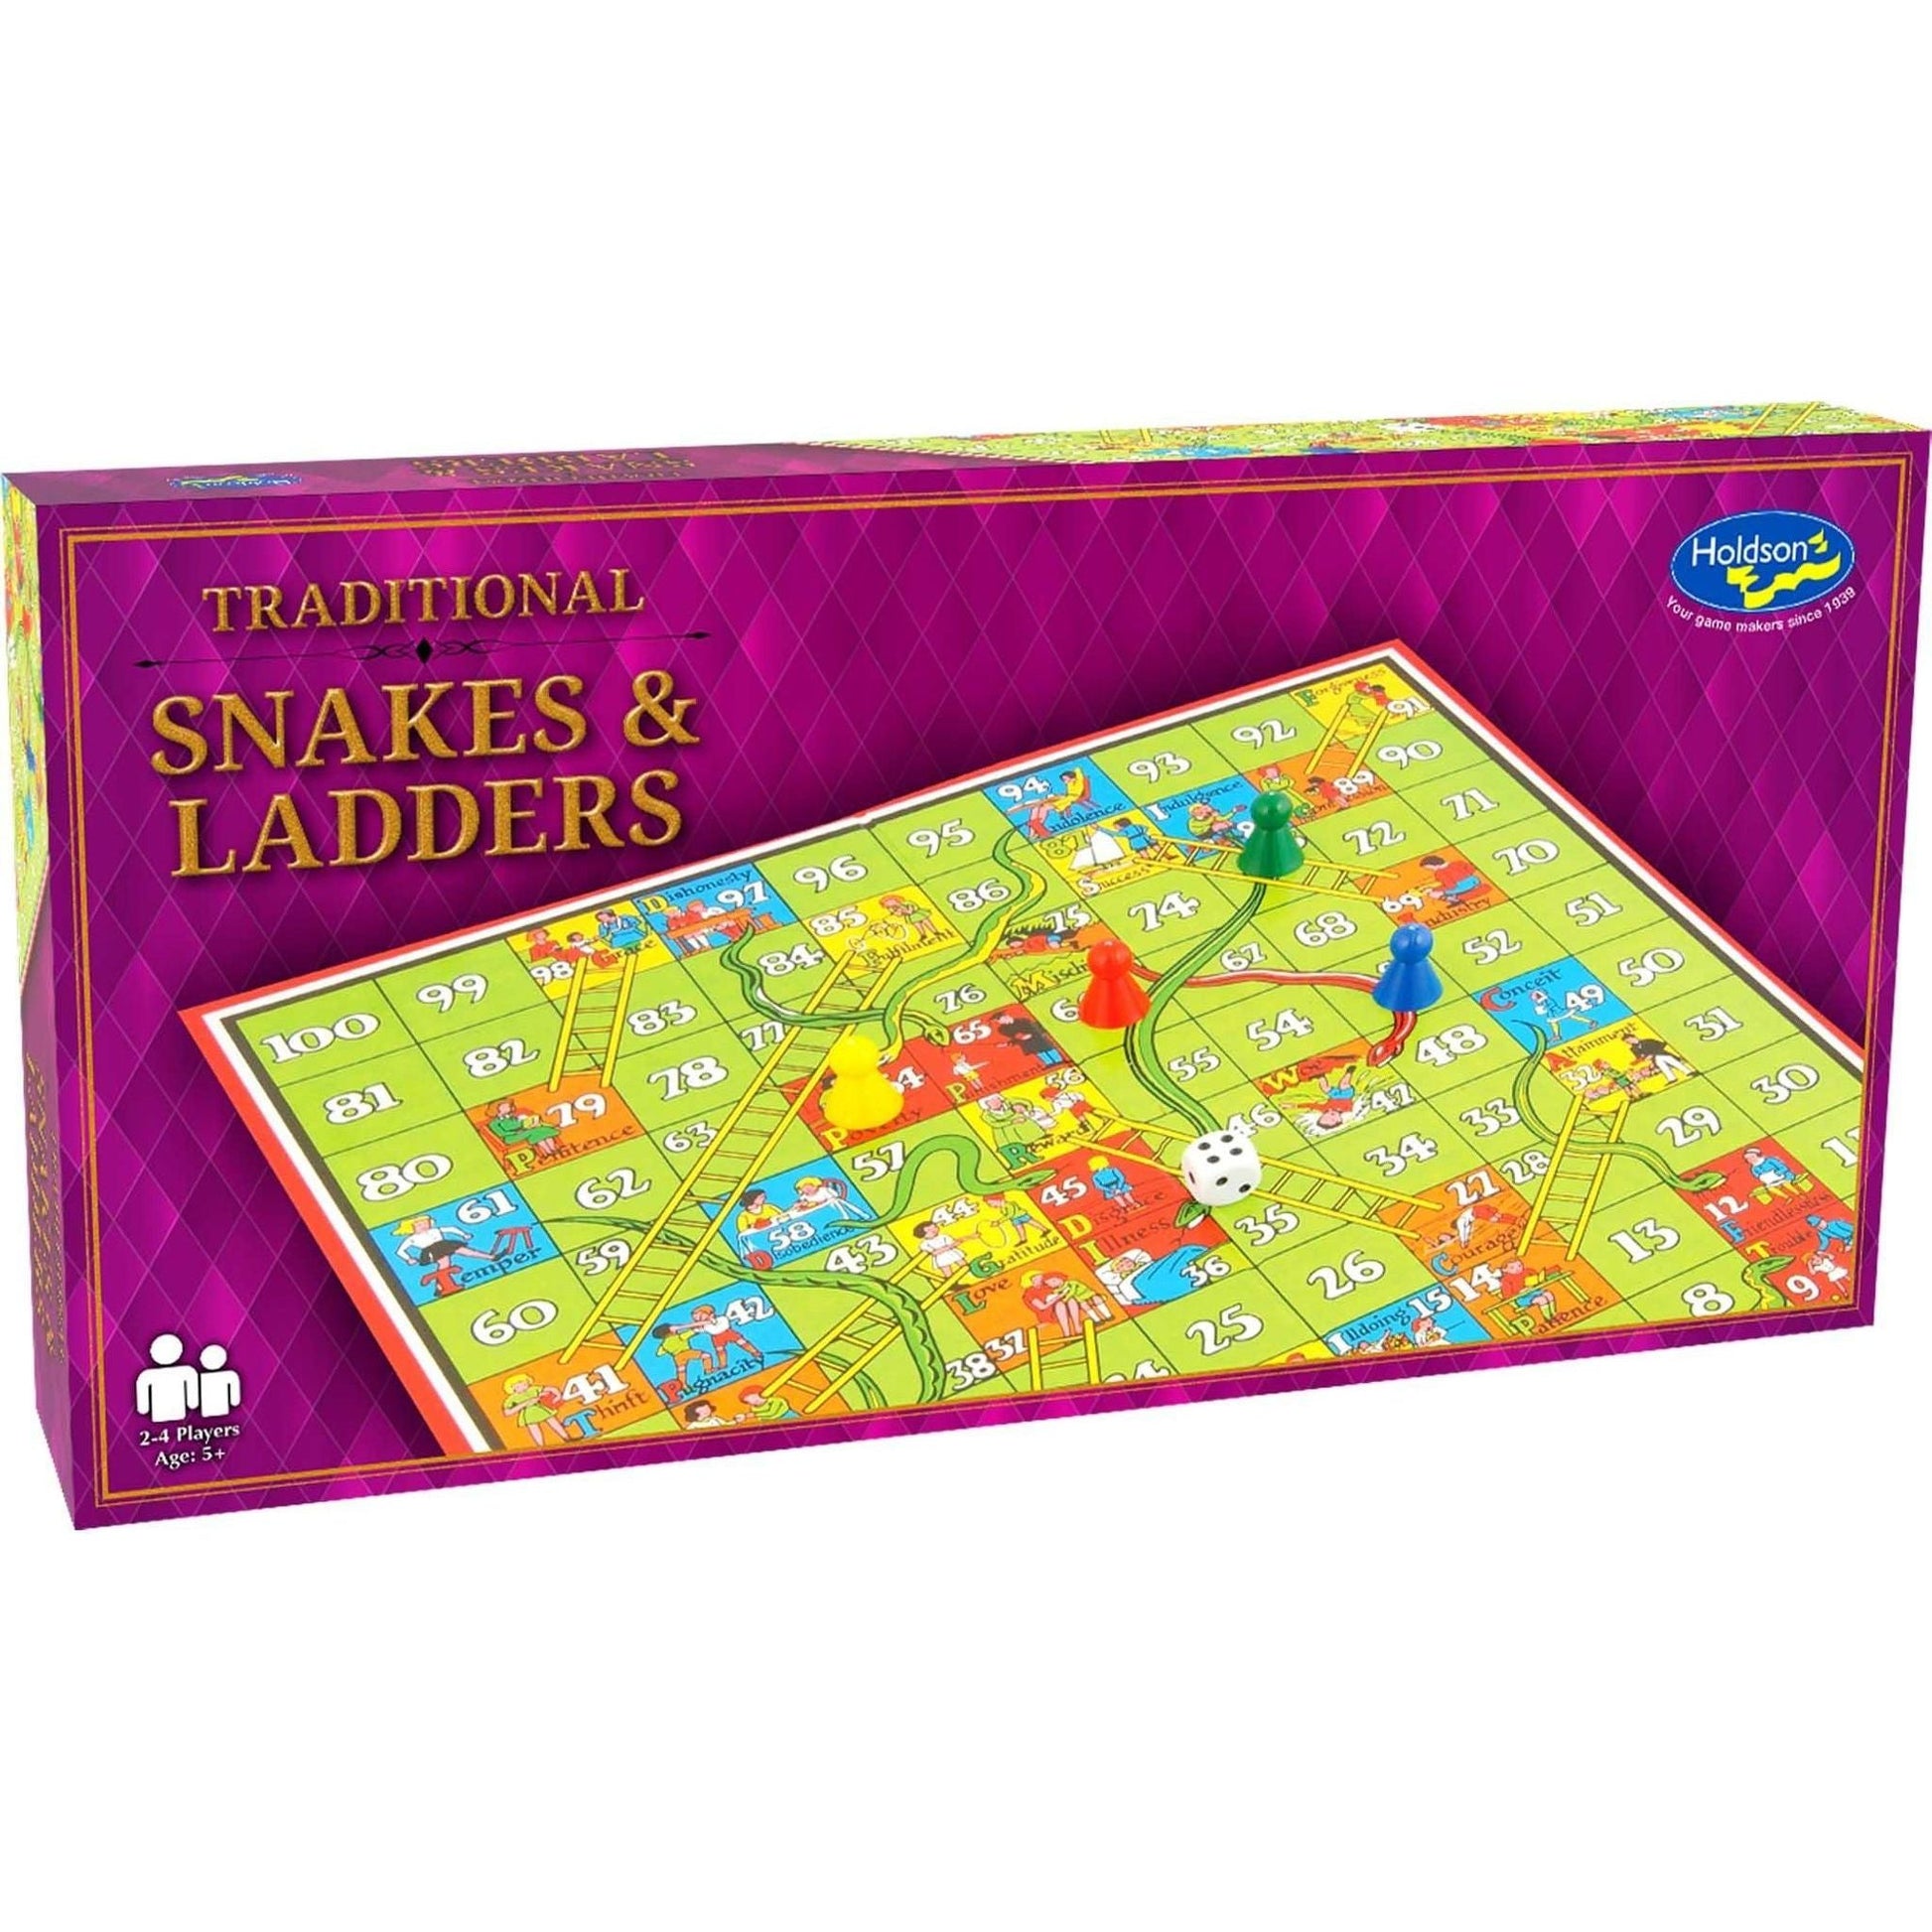 Snakes & Ladders - Toybox Tales